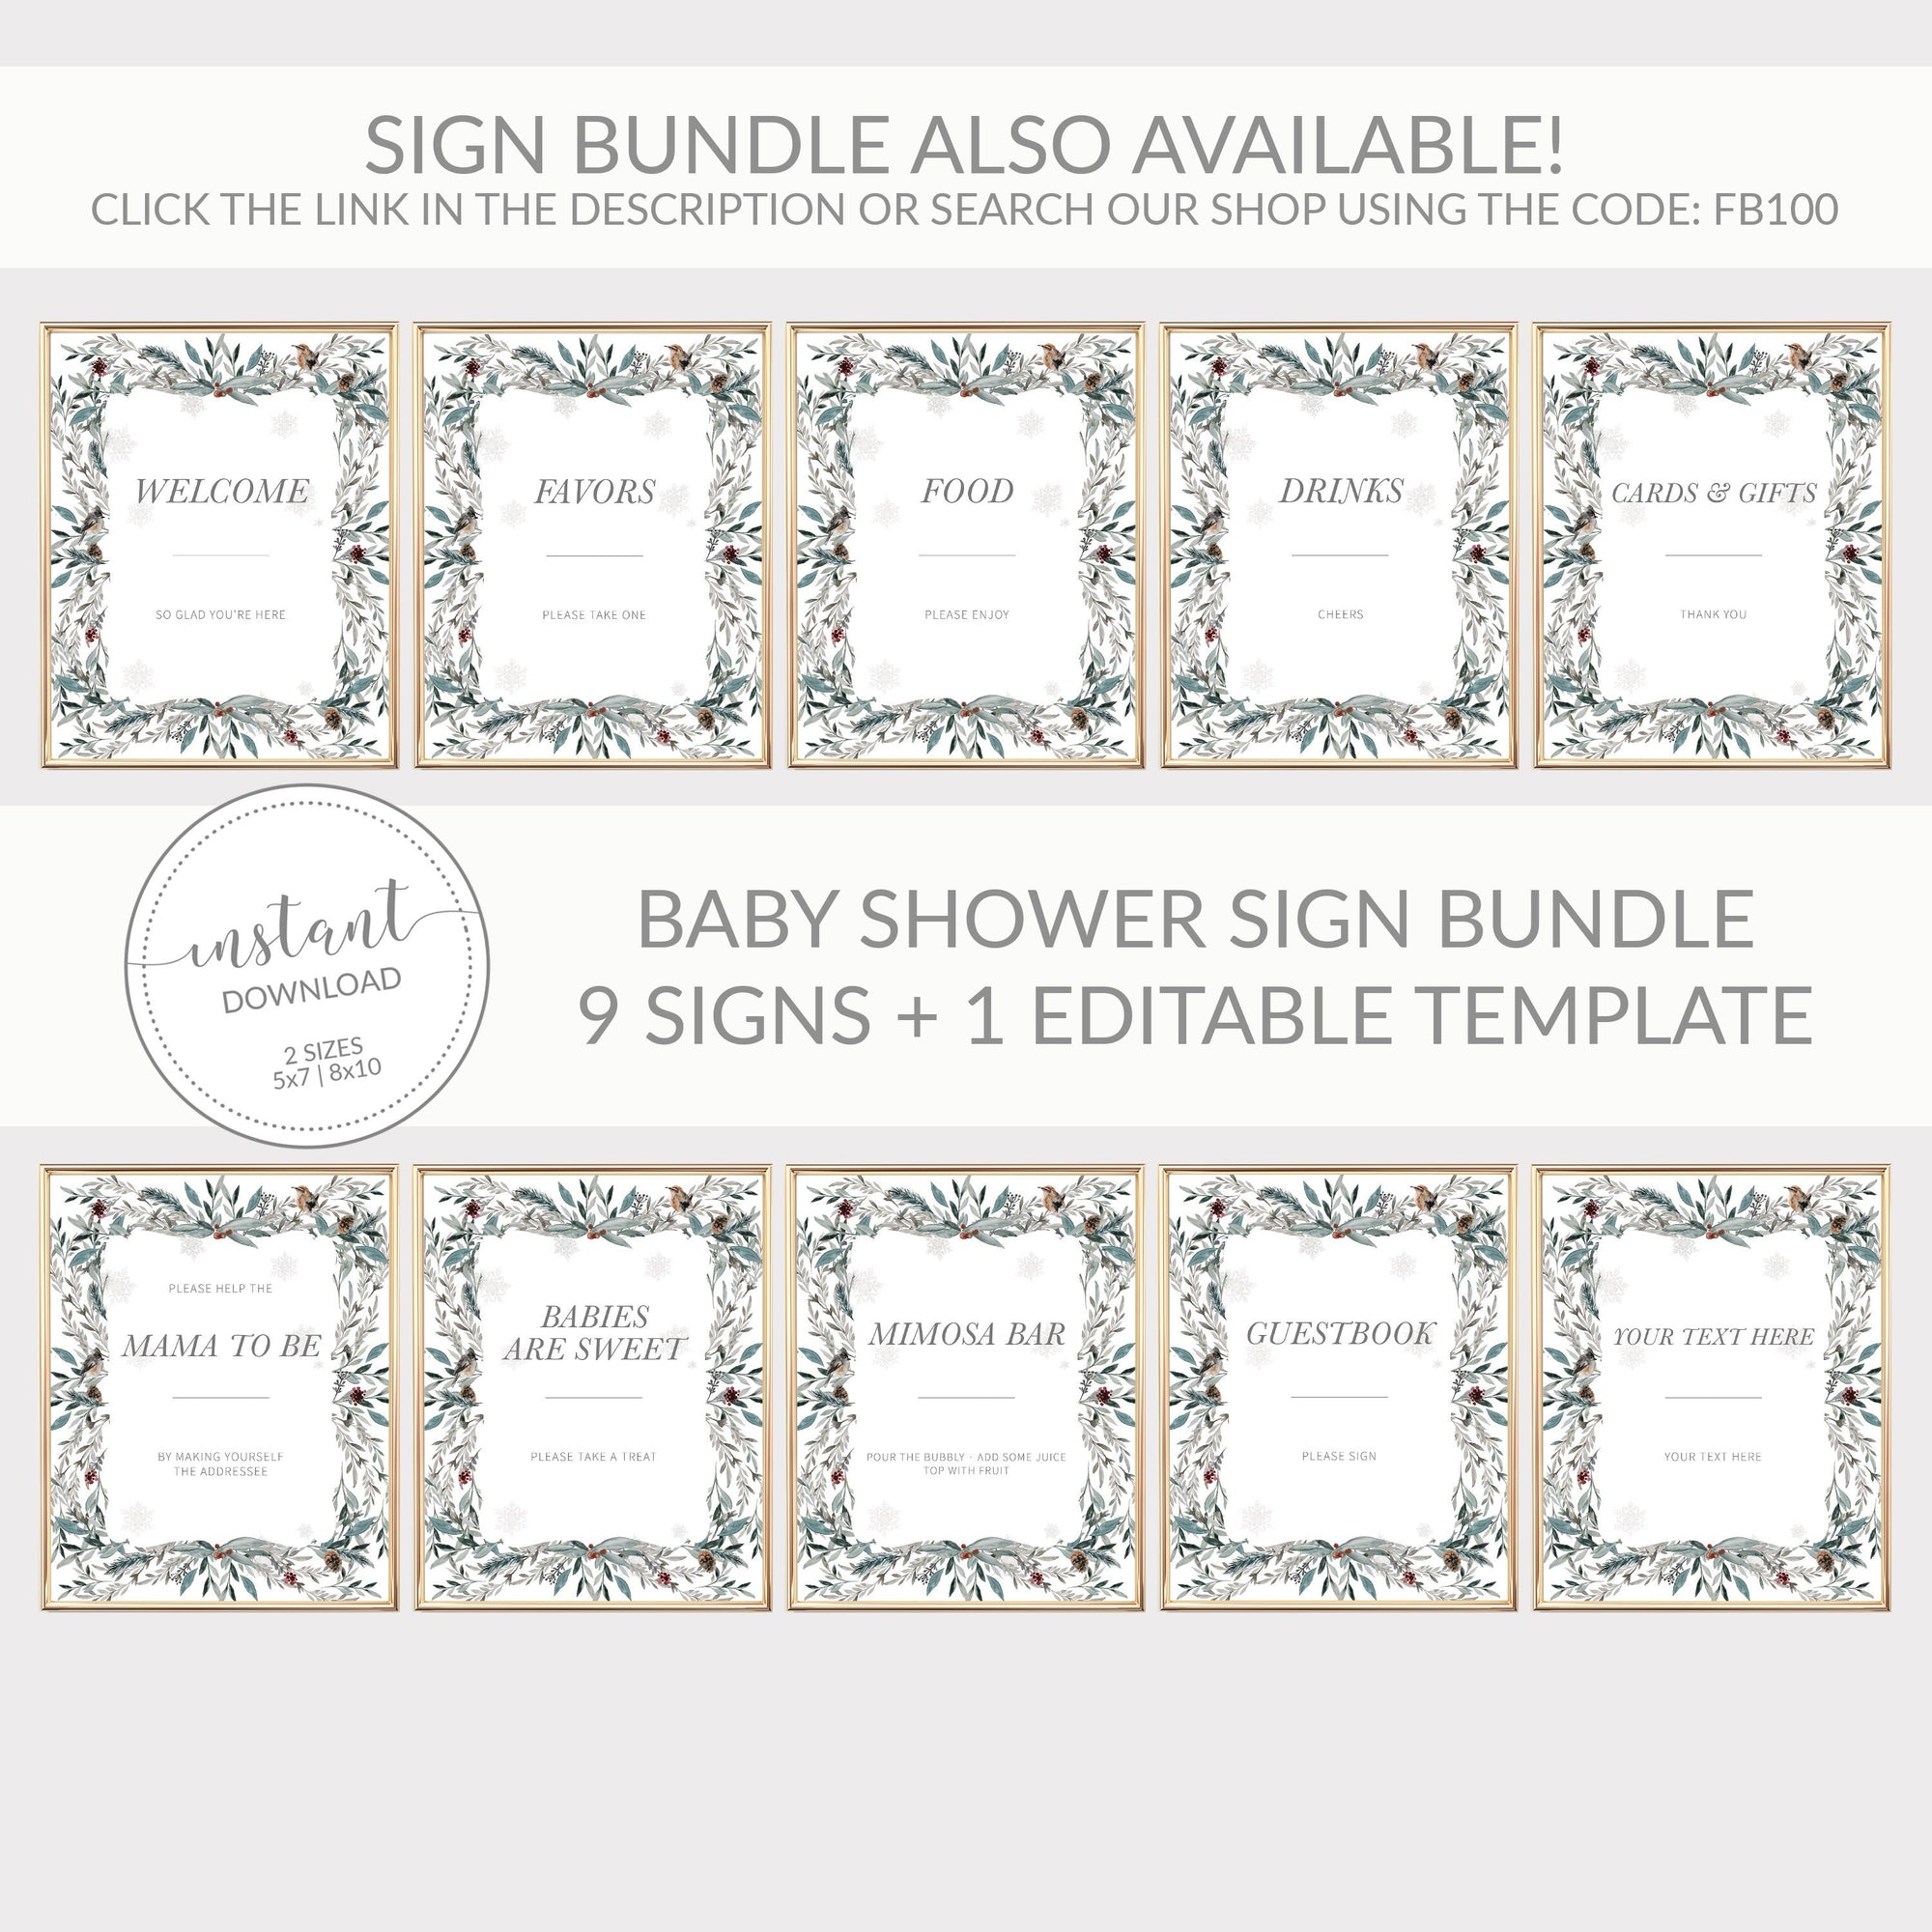 Christmas Guestbook Sign Printable, Winter Bridal Shower, Baby Shower, Christmas Wedding, Christmas Party Decoration, INSTANT DOWNLOAD FB100